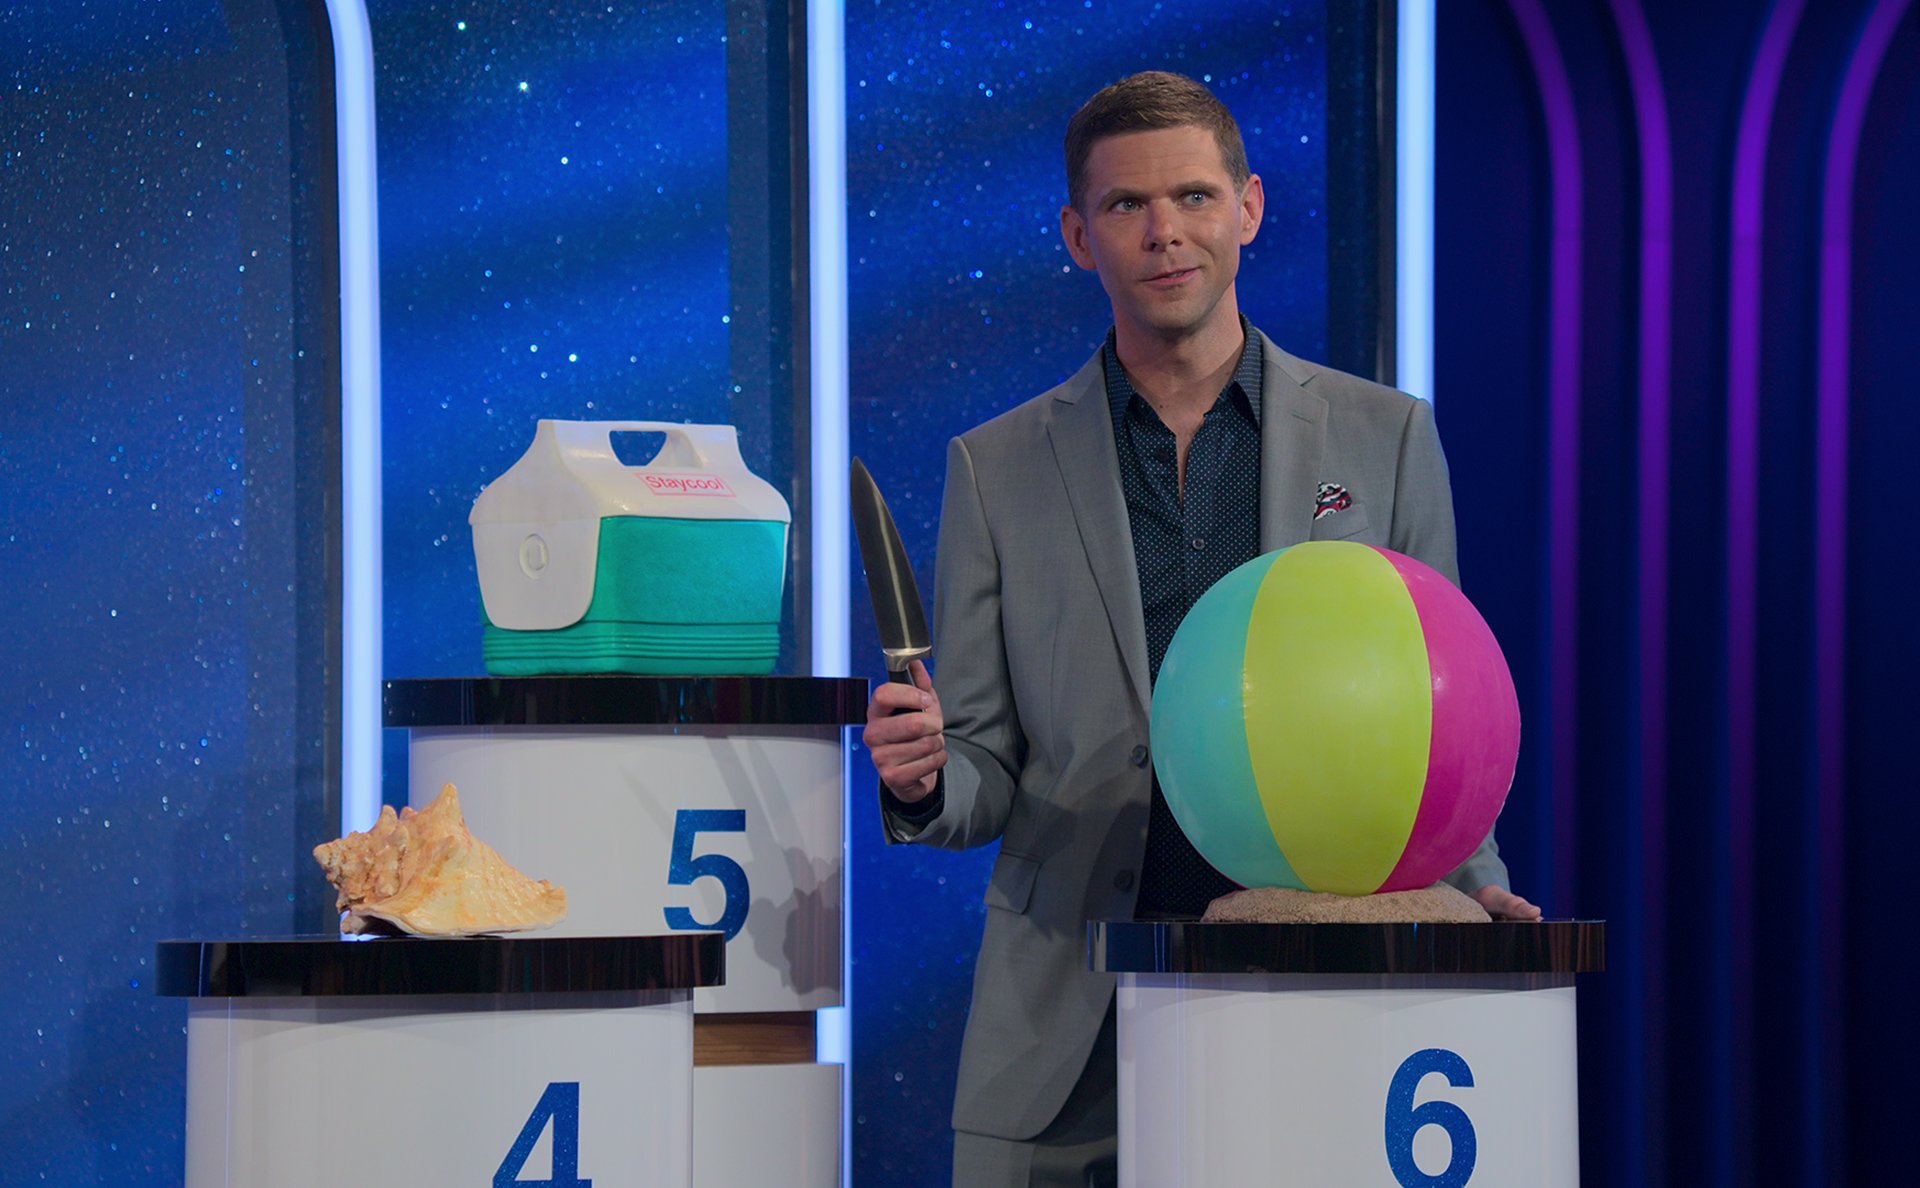 Is It Cake?: Why Host Mikey Day Looks So Familiar